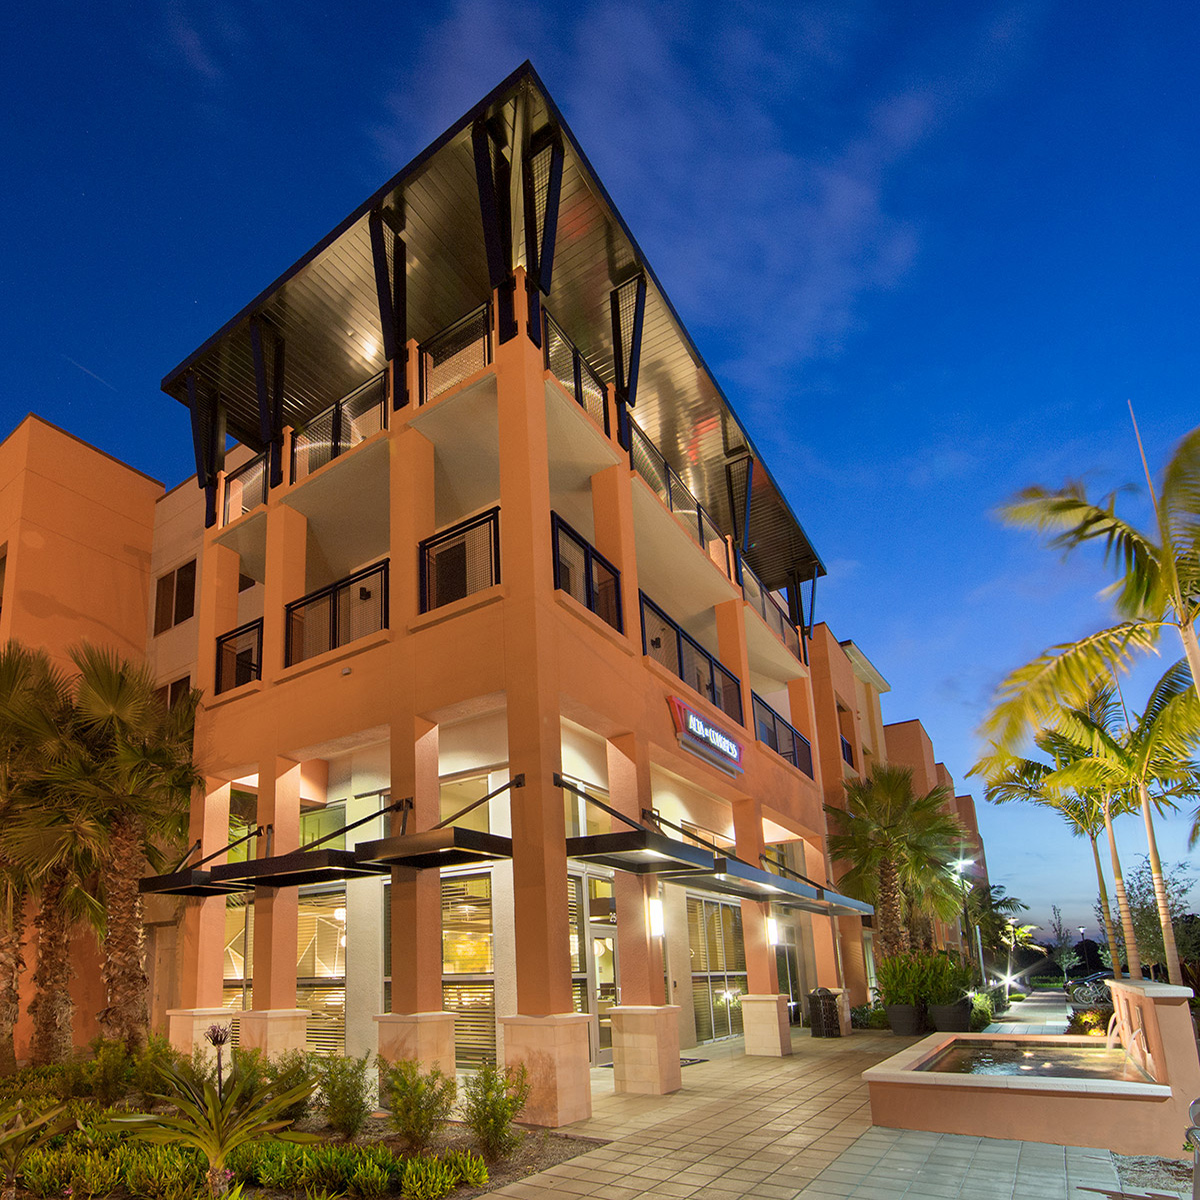 Architectural dusk view at the Alta Congress Luxury Rentals - Delray Beach, FL